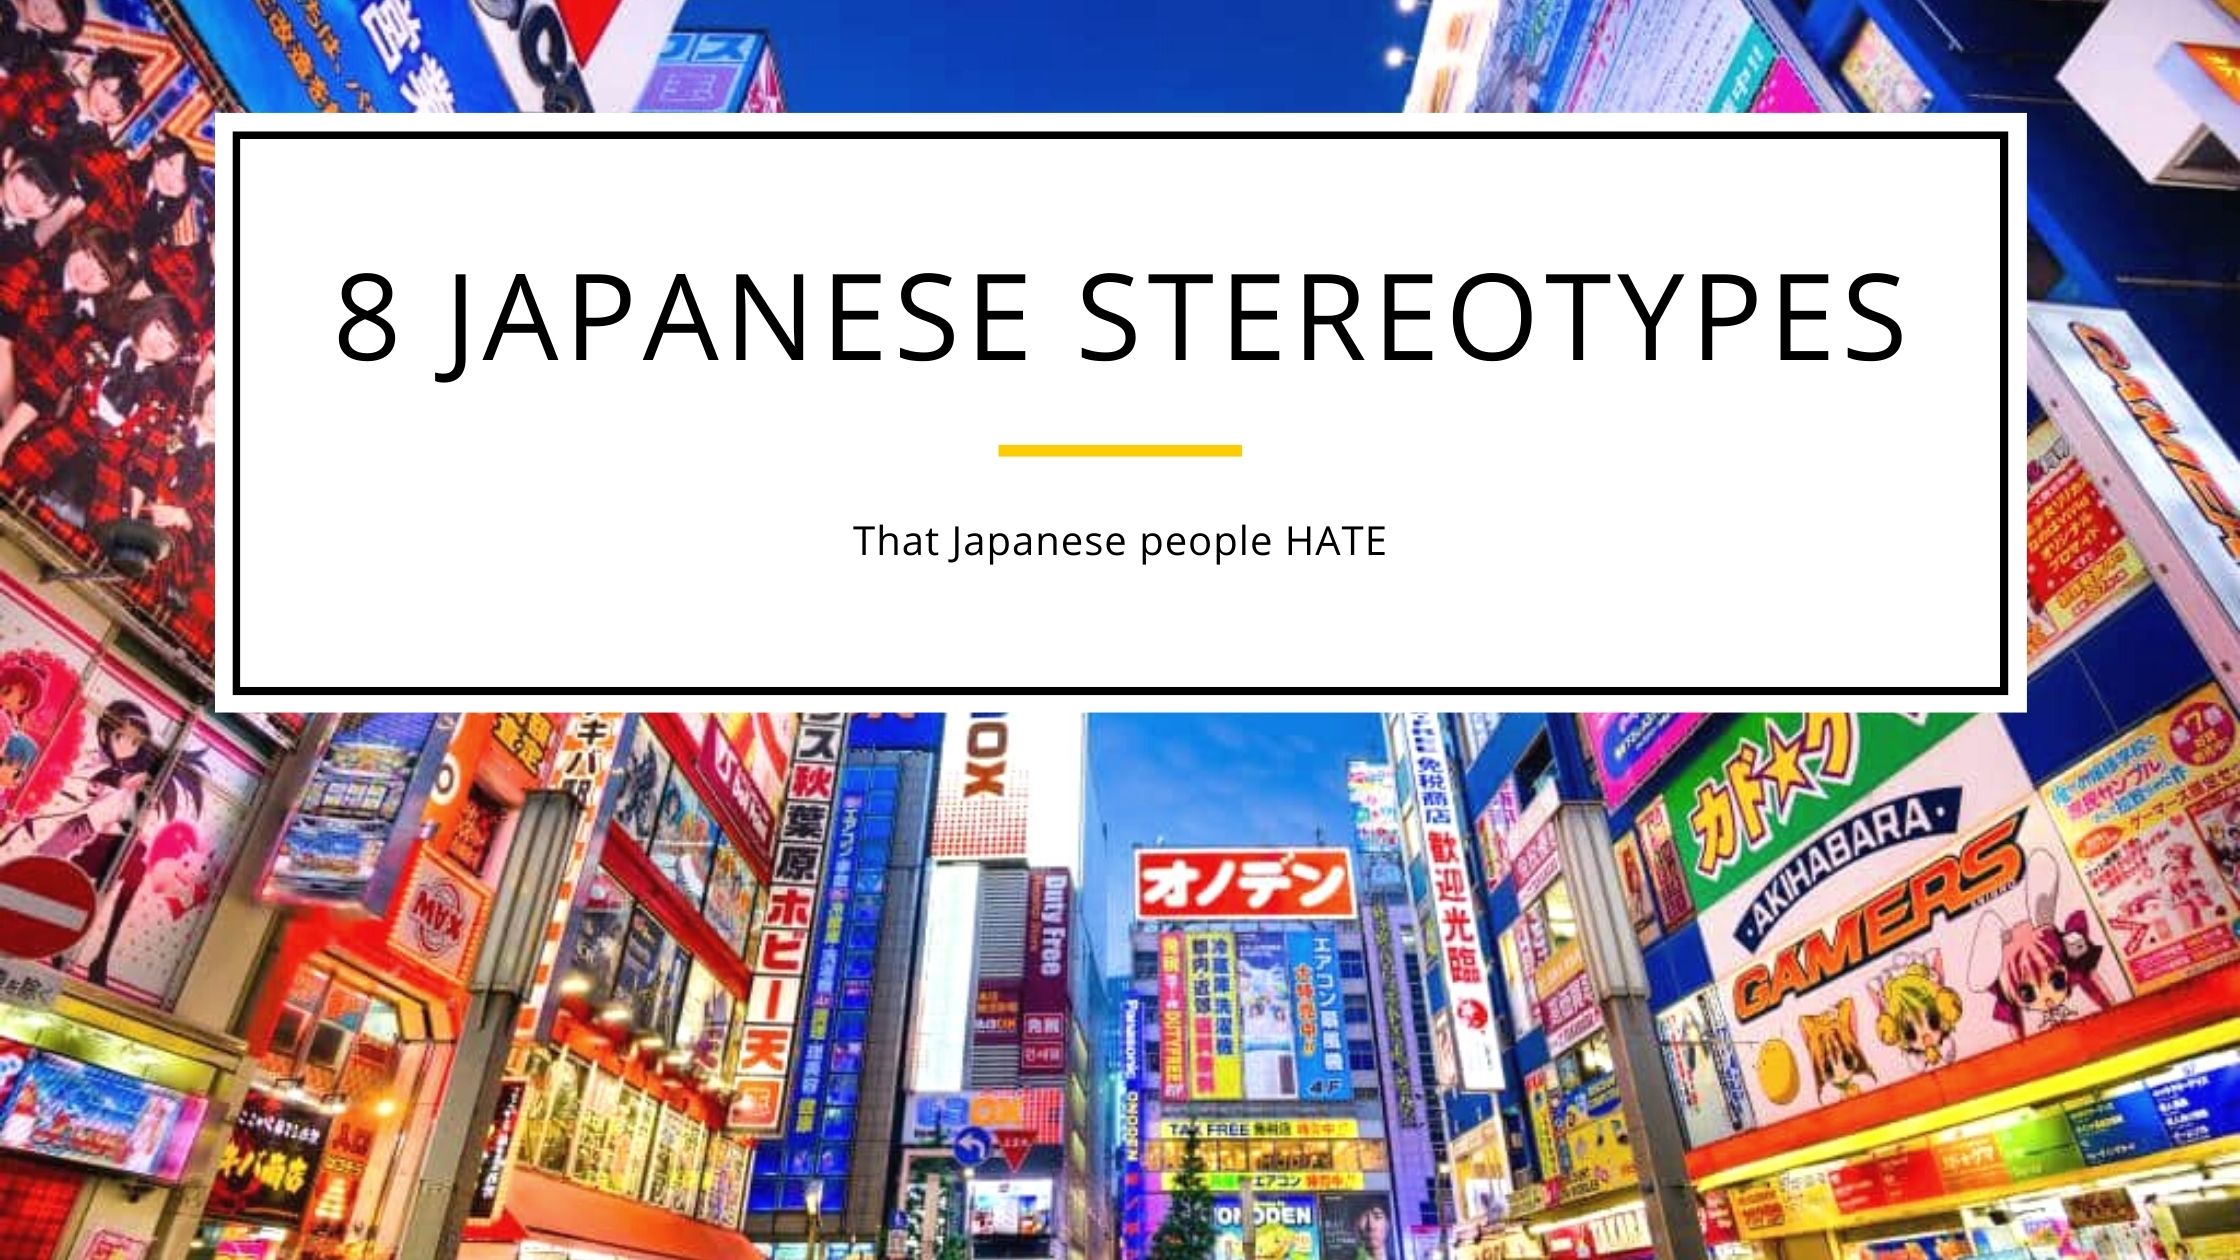 8 Japanese stereotypes the Japanese hate